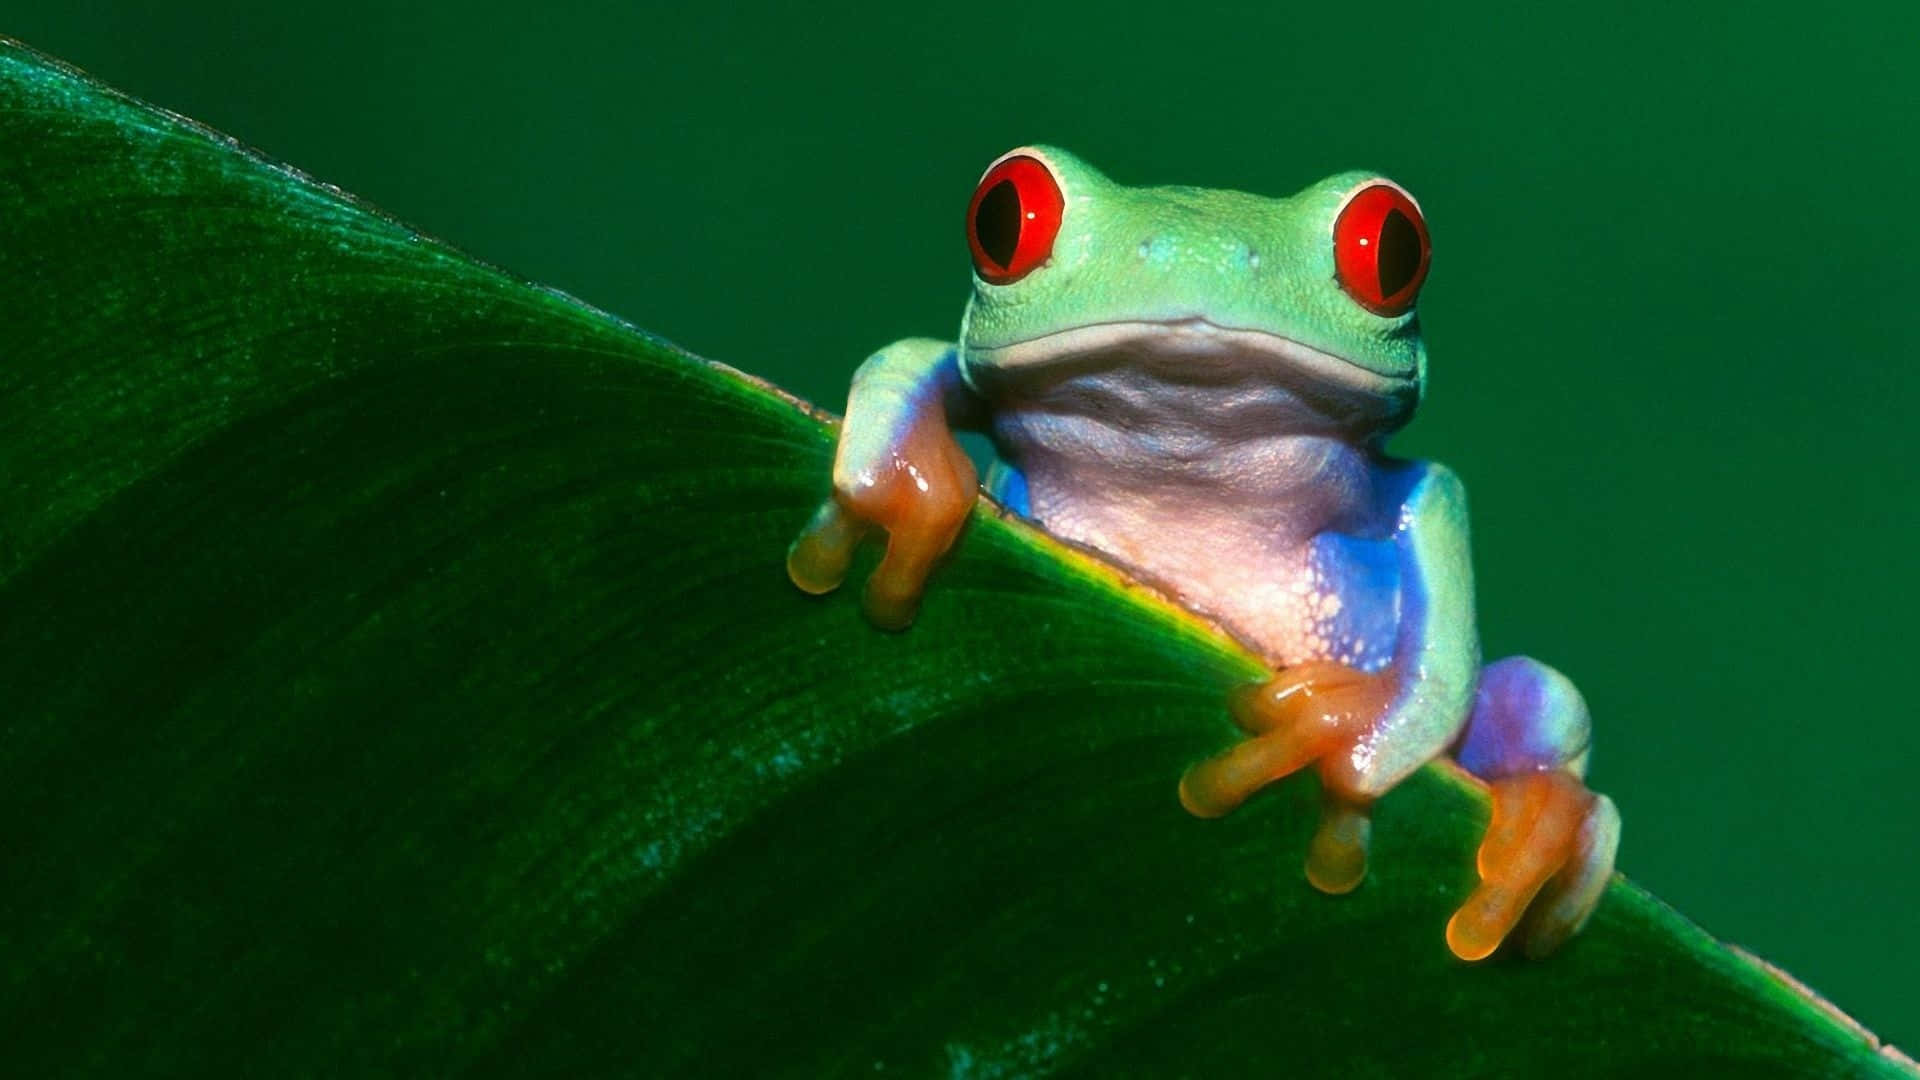 A close up of a happy green frog